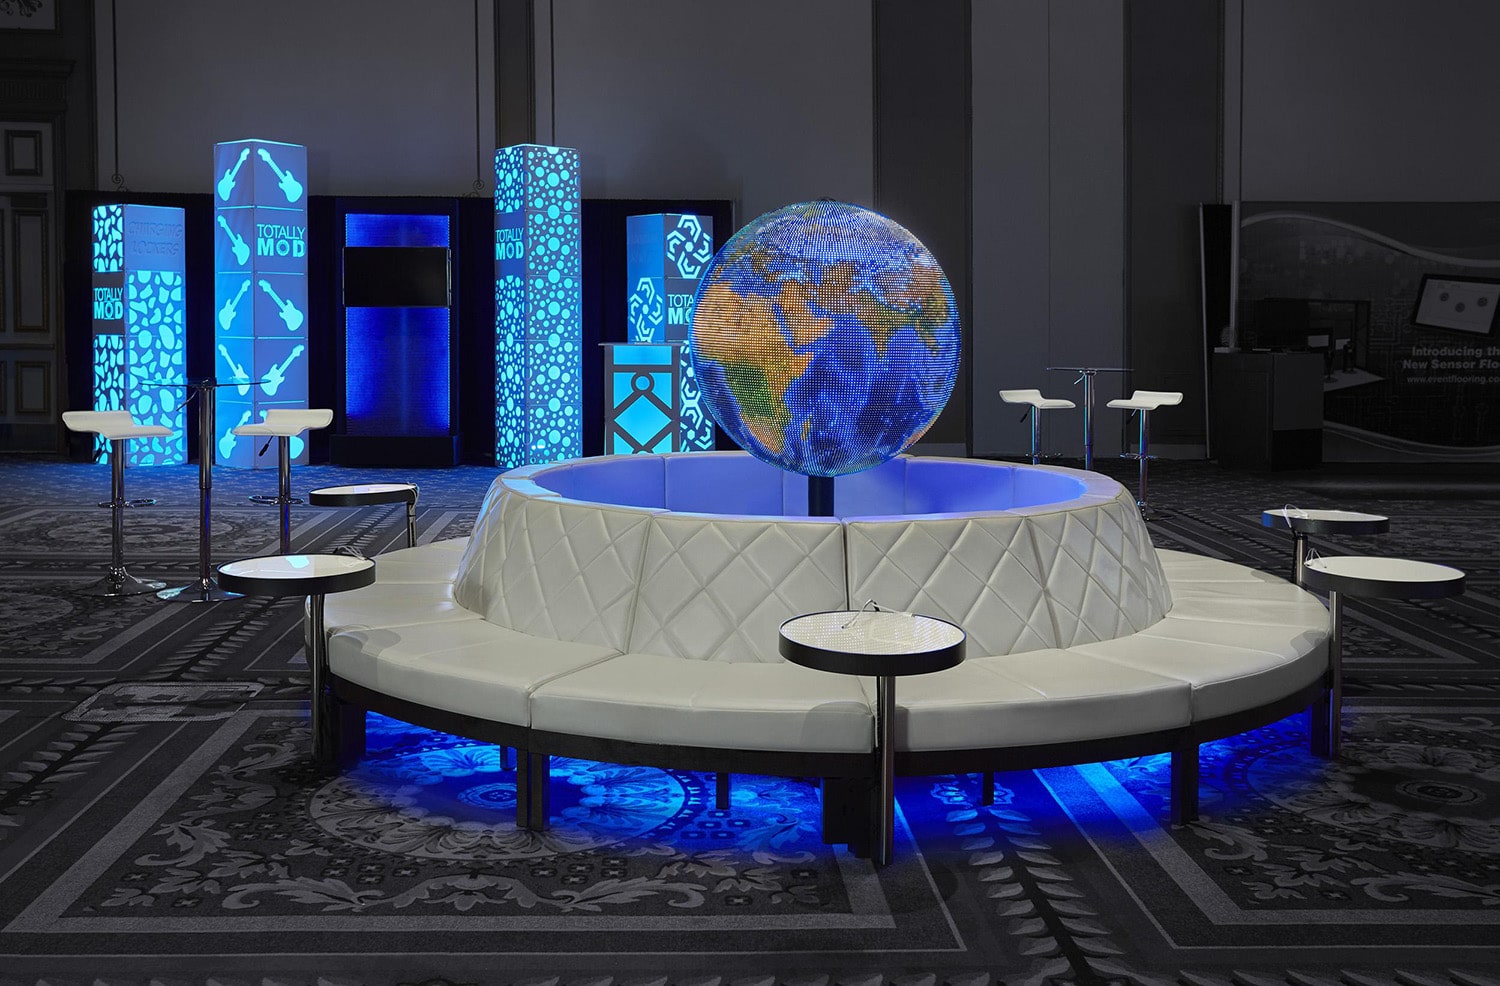 Quest Events Totally Mod Corporate Special Events Scenic Design Lounge Hotel Convention Conference Furnishings Leather Soft Seating Tables Style Tyles